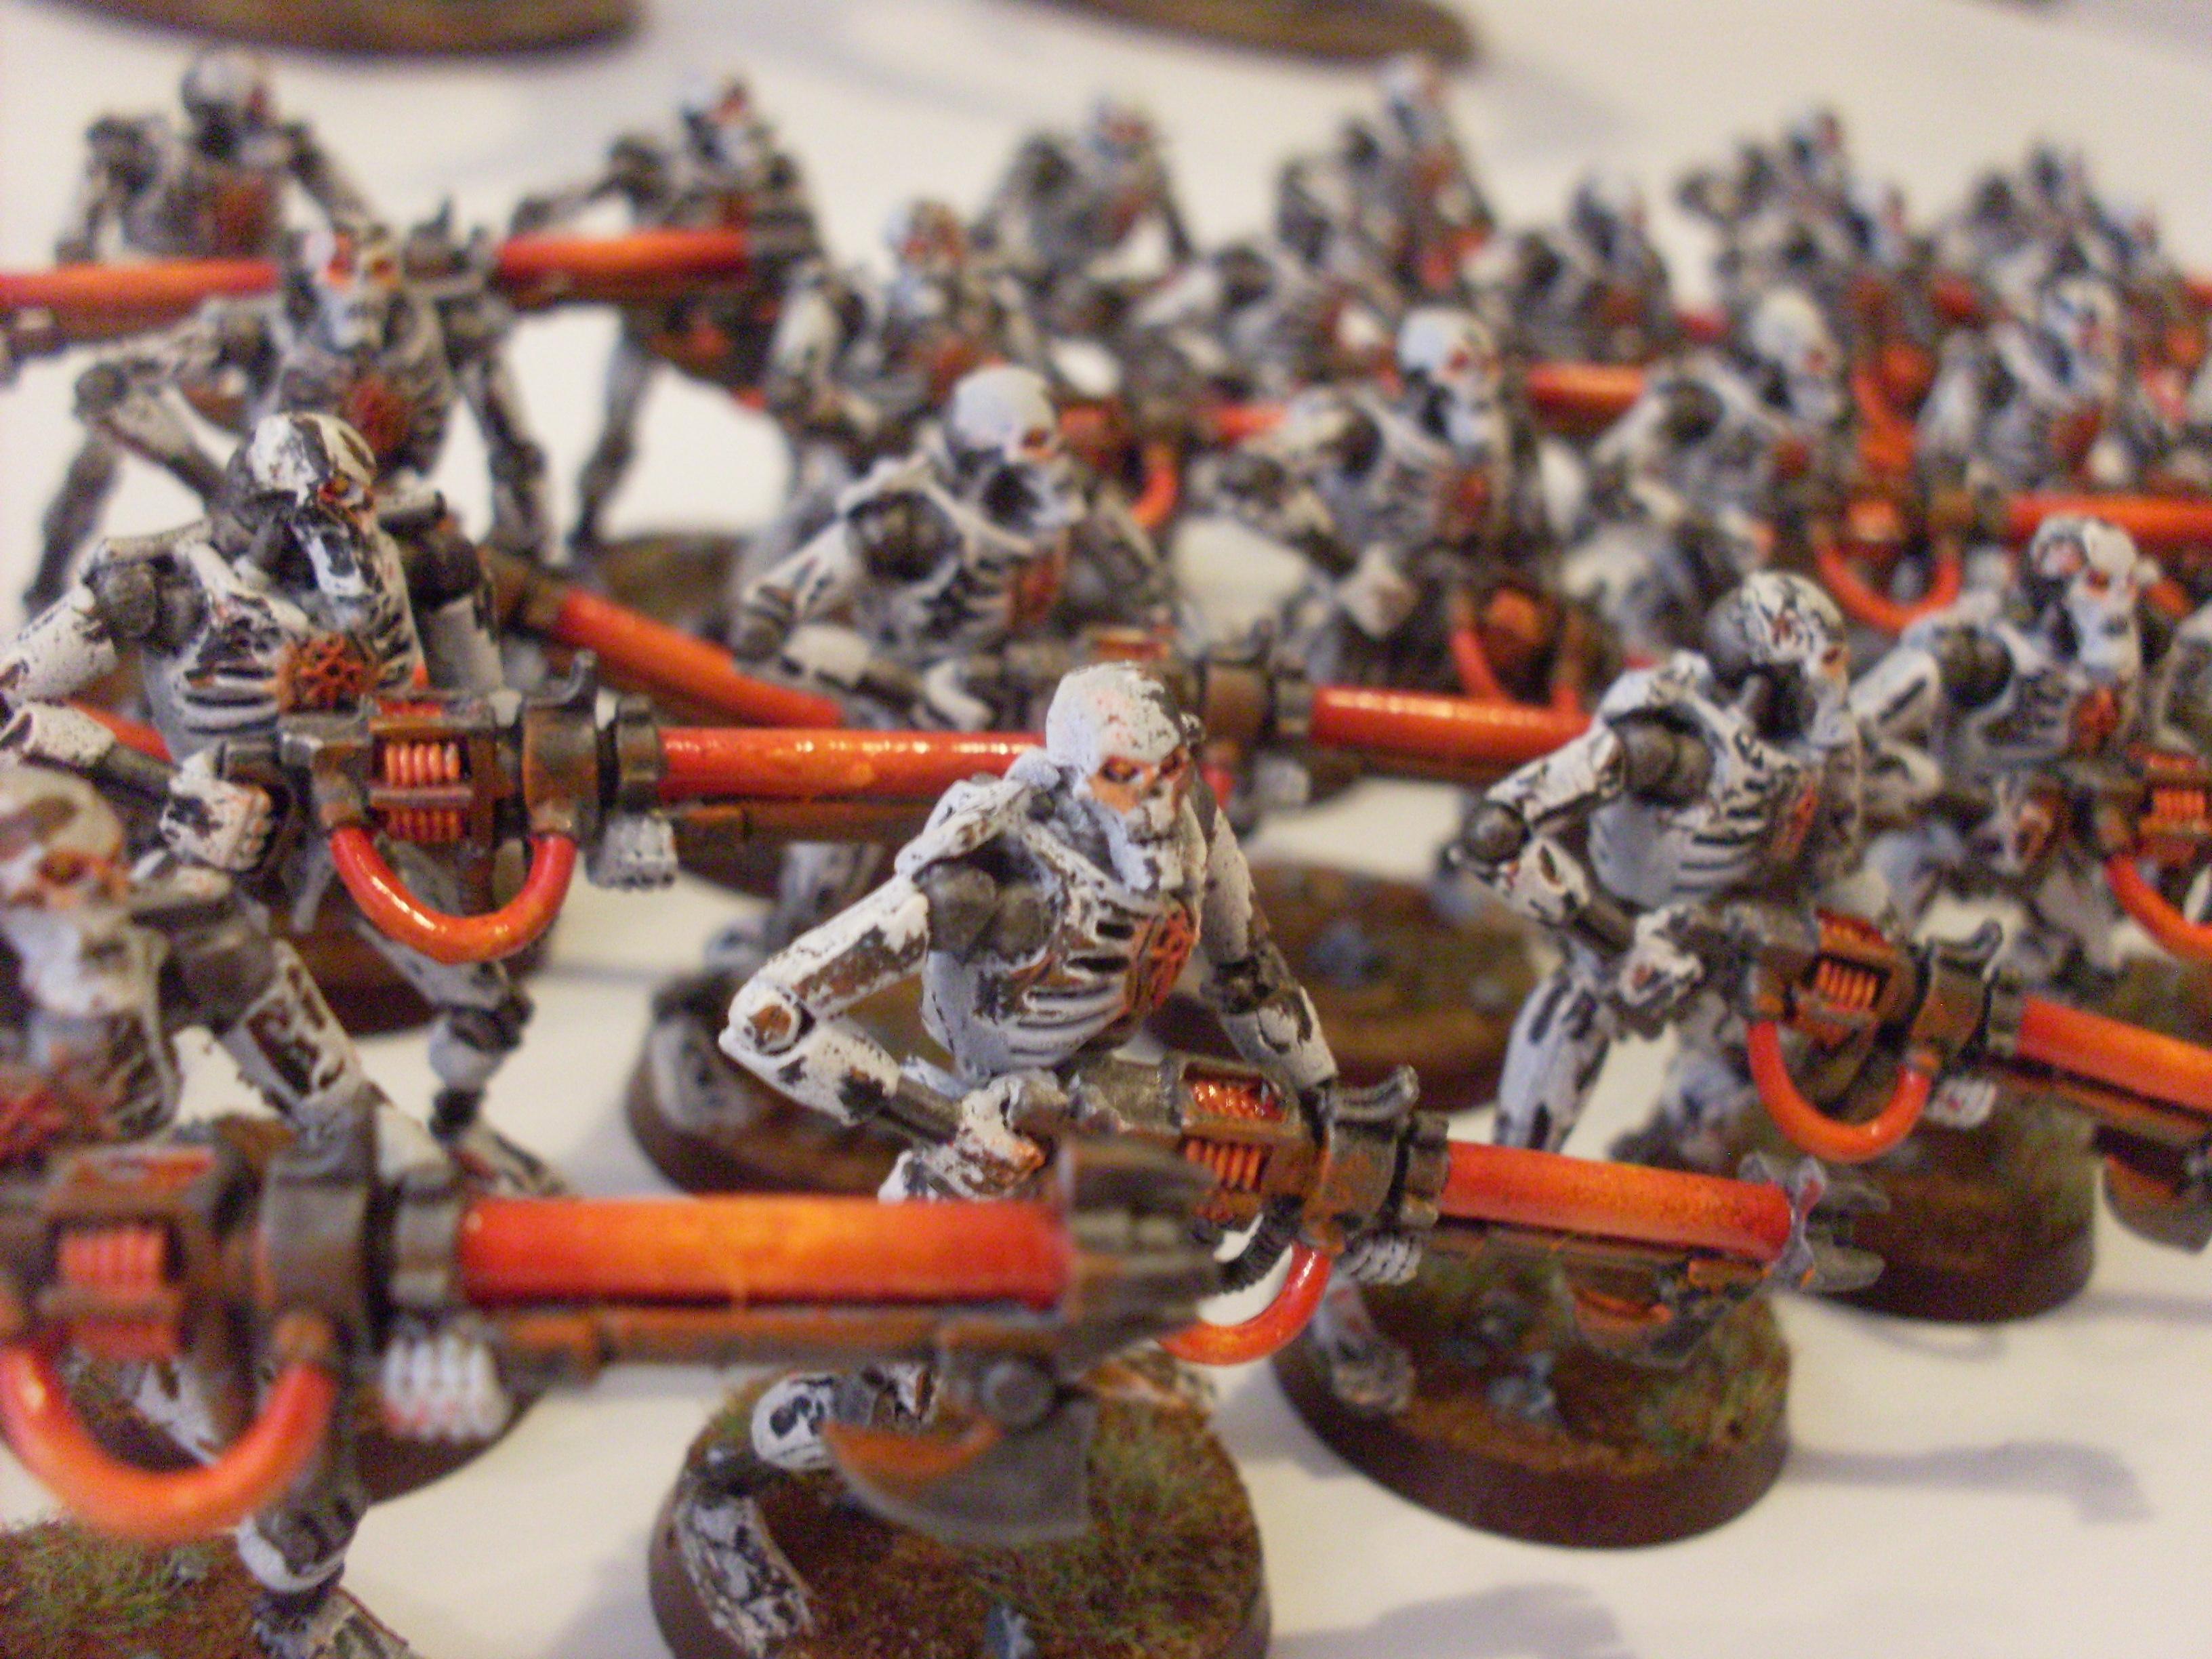 Airforce, Deathmarks, Doomscythe, Lord, Necrons, Nightscythe, Orange, Overlord, Red, Rust, Scarabs, Scythe, Tomb Blade, Warriors, White